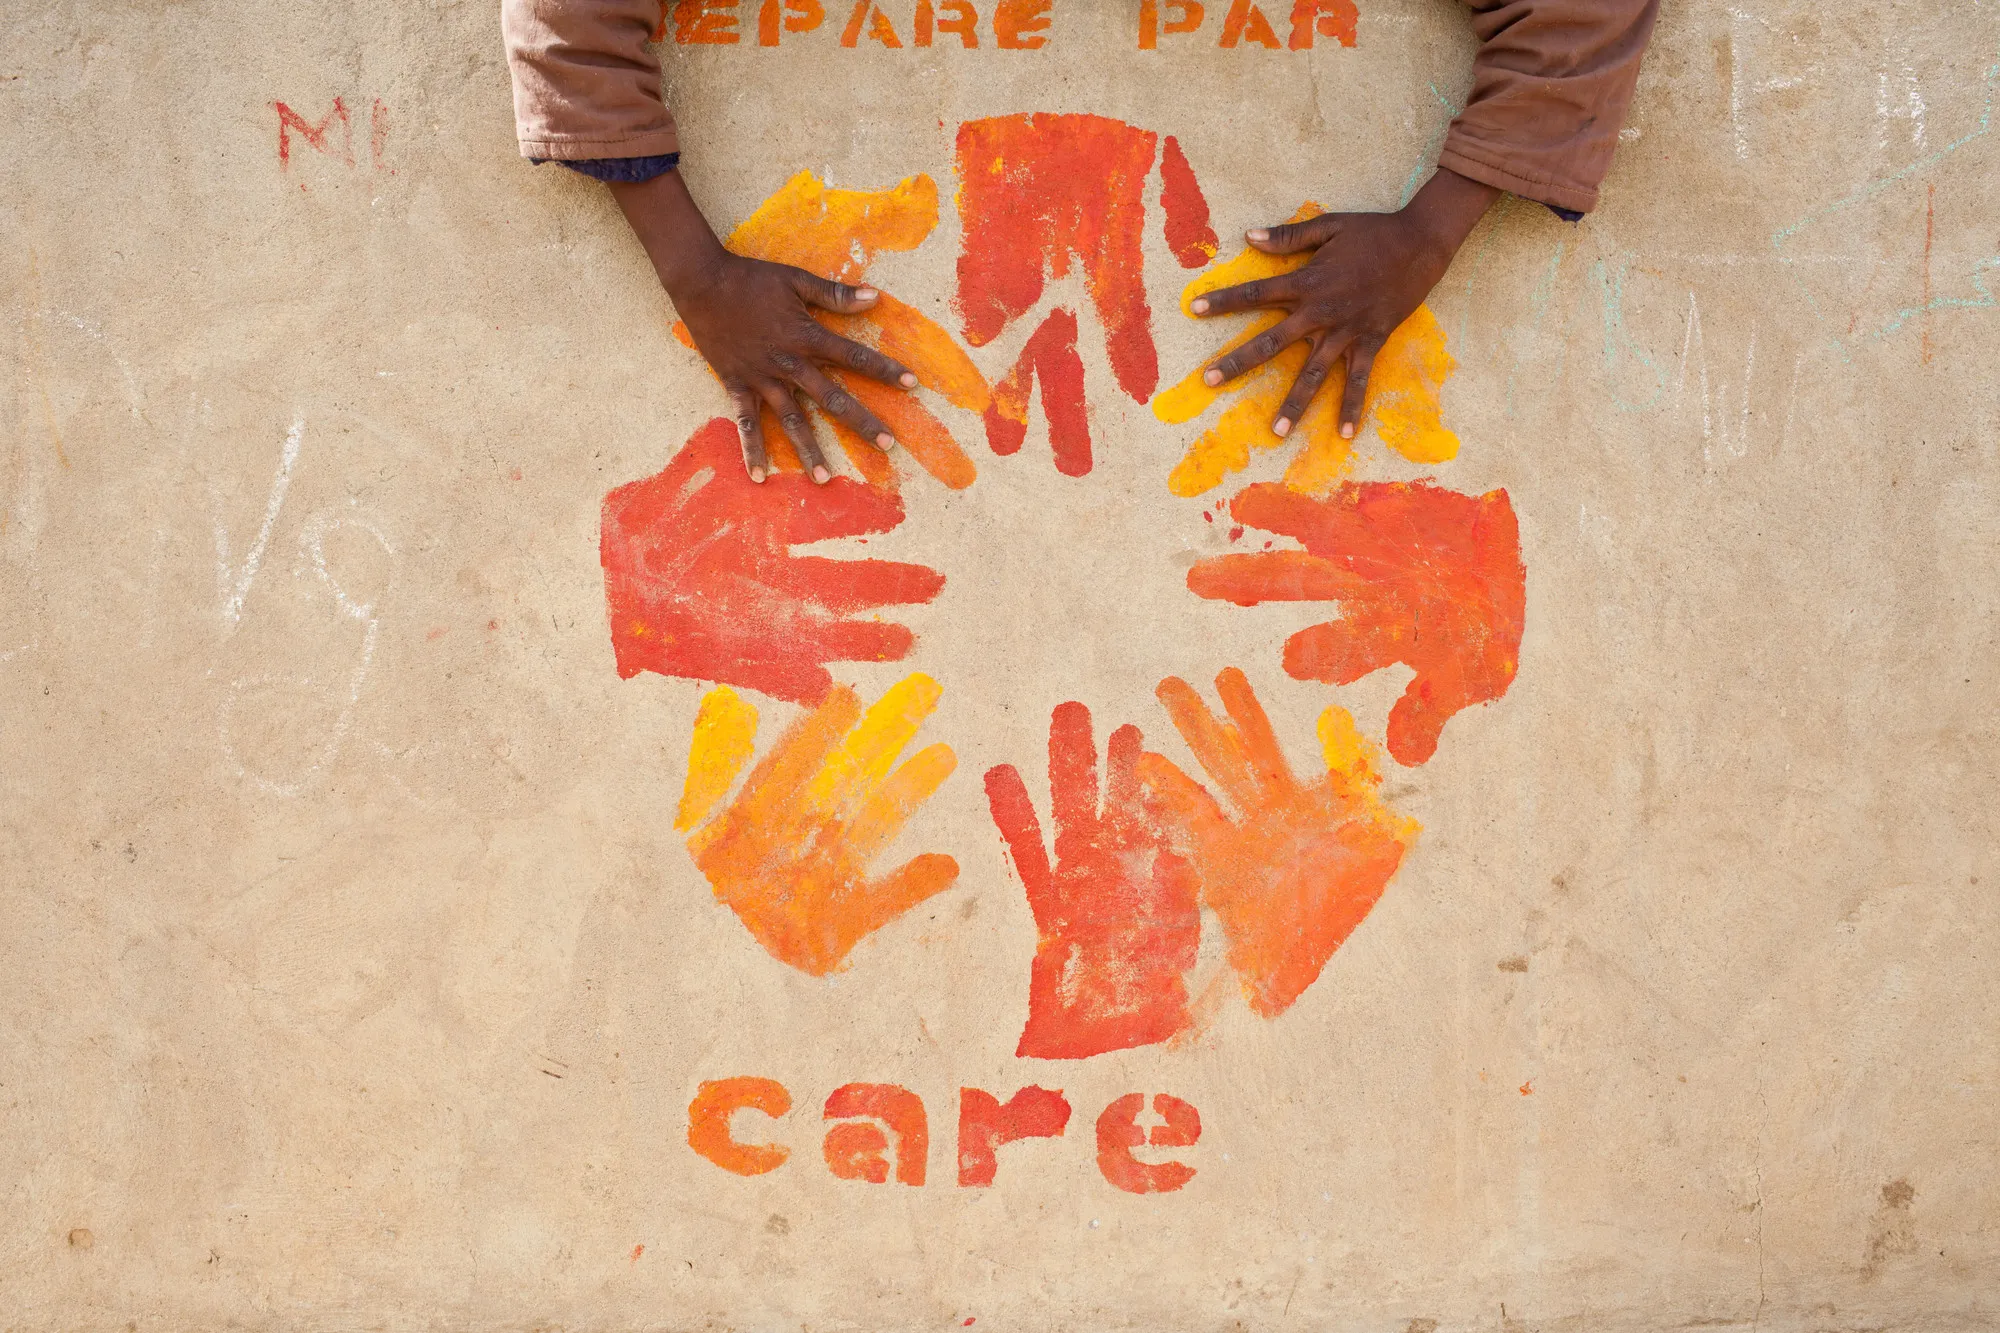 Two hands on a painted CARE logo